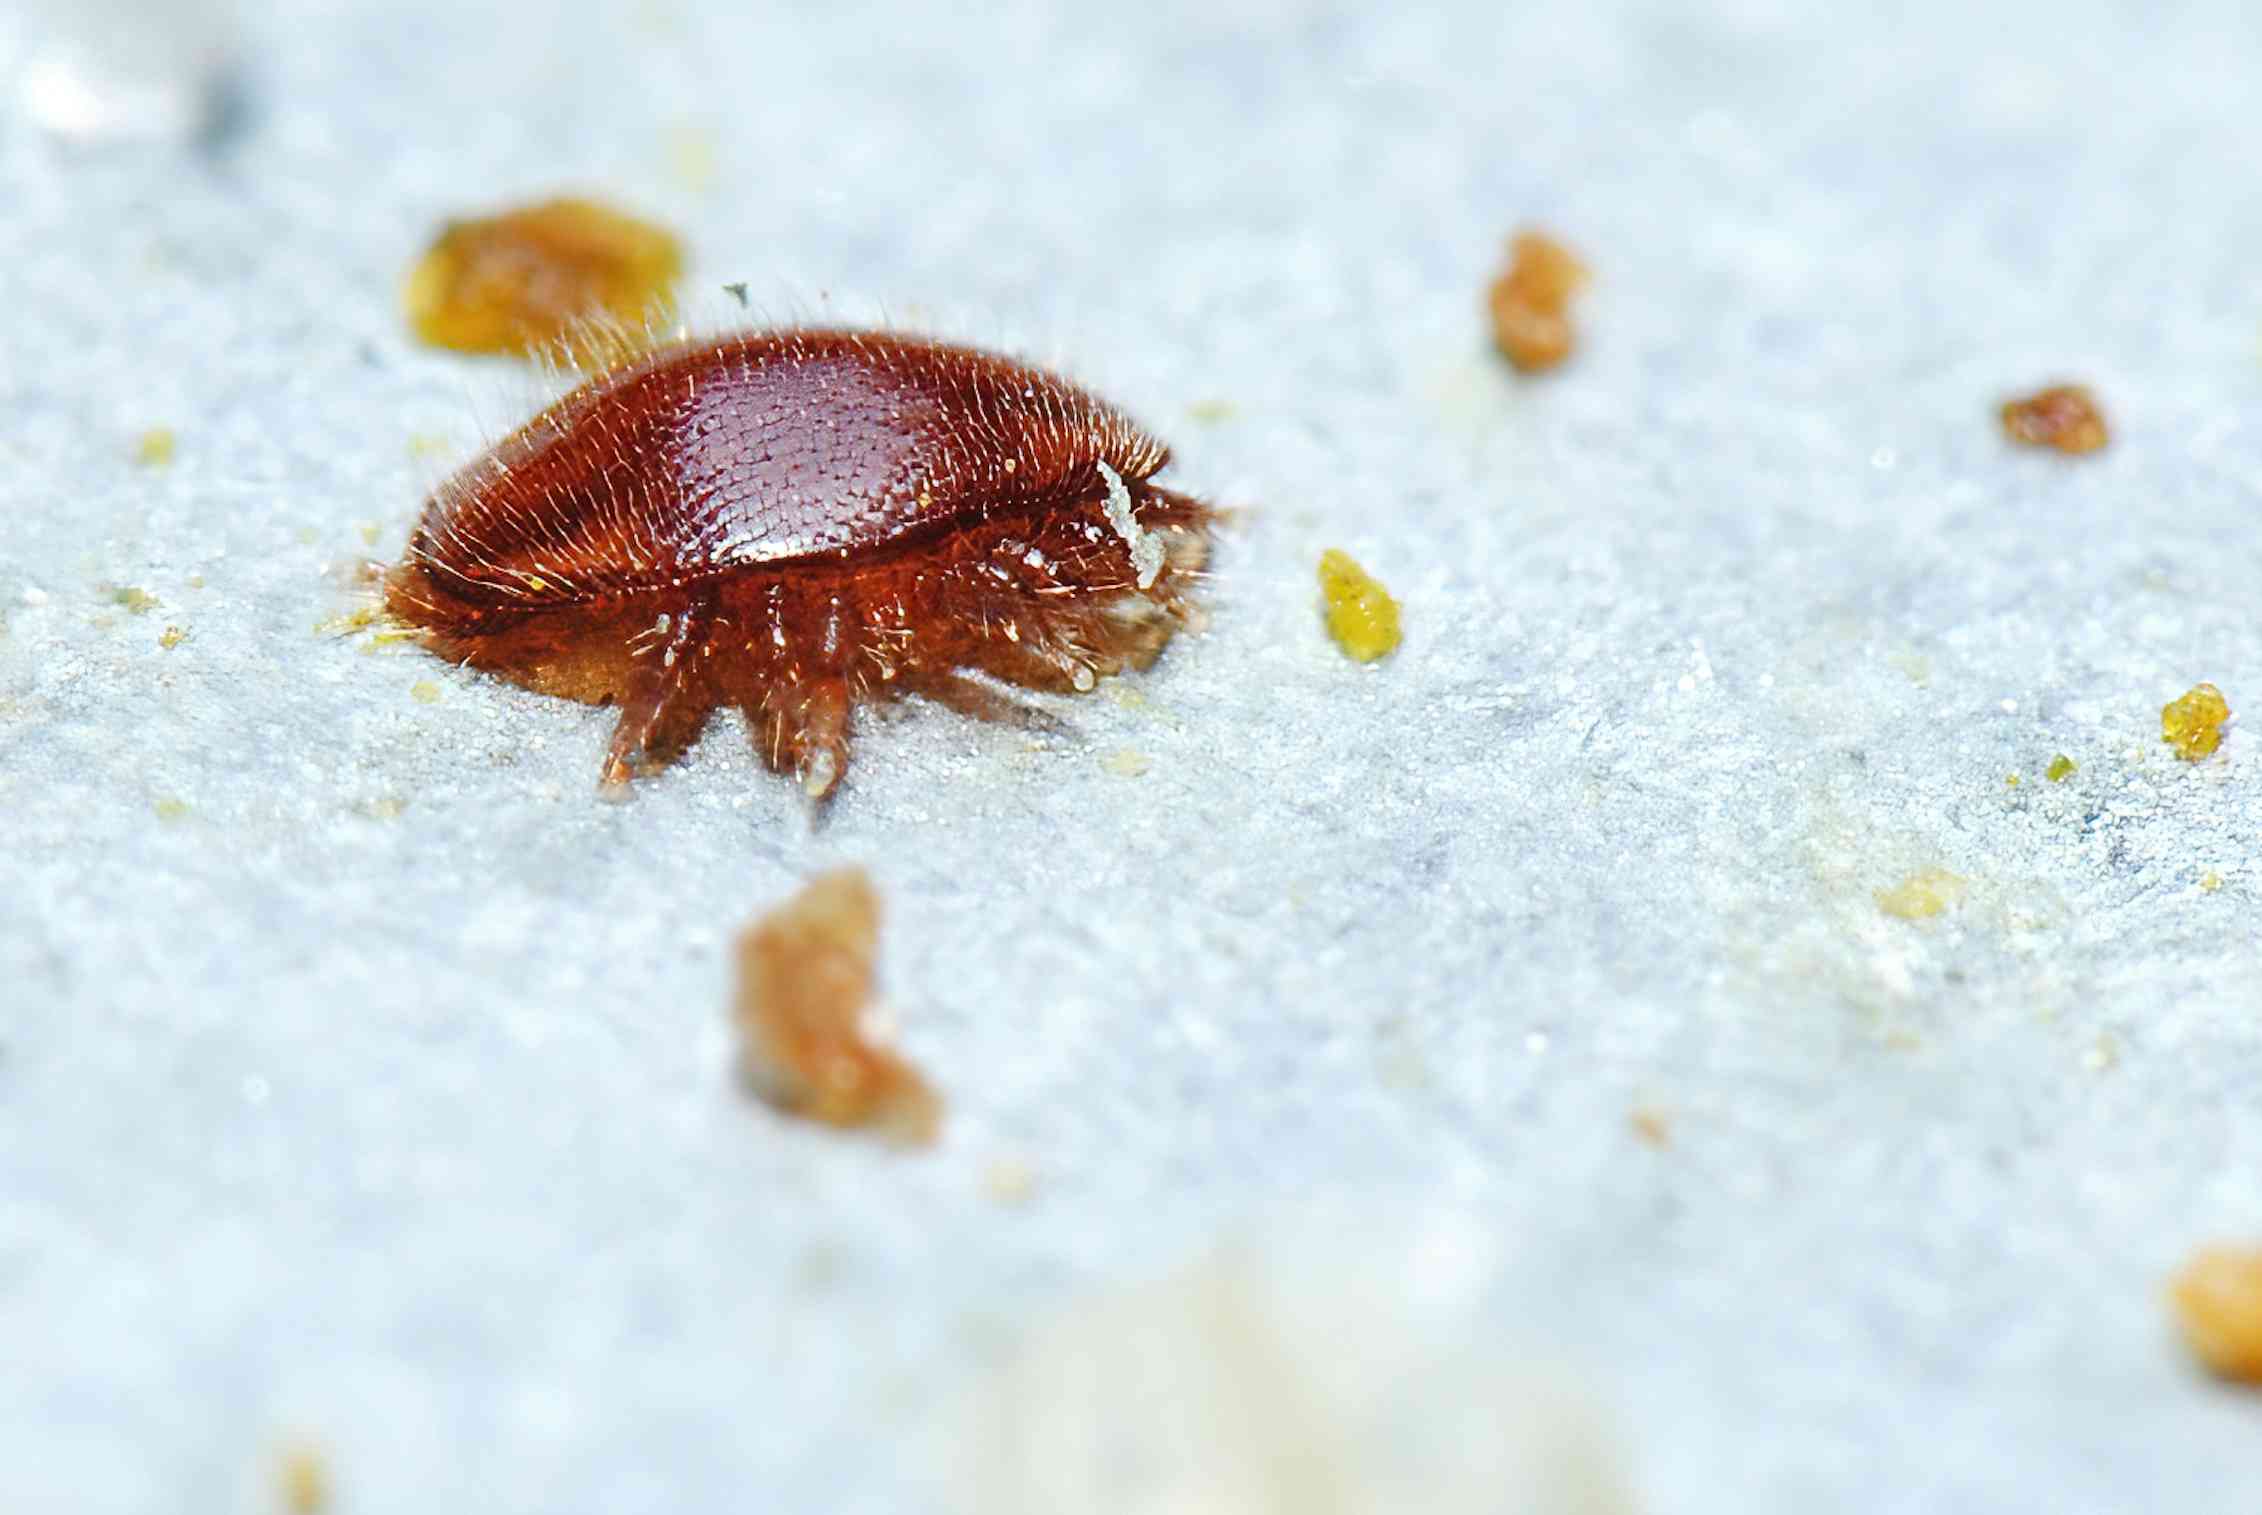 A small red mite facing the camera on a grey metallic background, the many legs of the mites are visible as well as a few pieces of wax